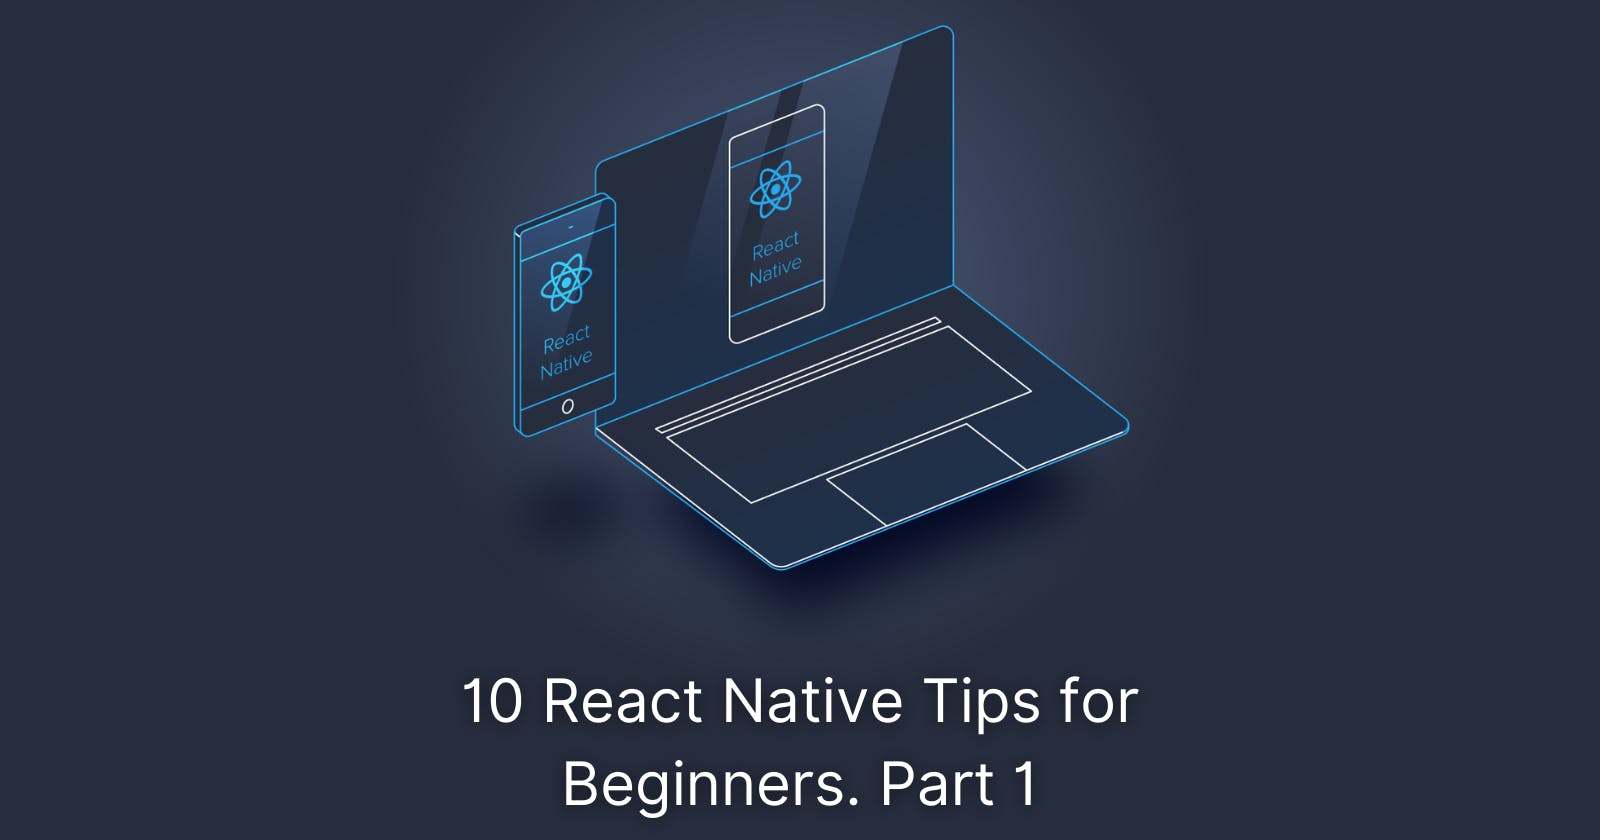 10 React Native Tips for Beginners, Part 1